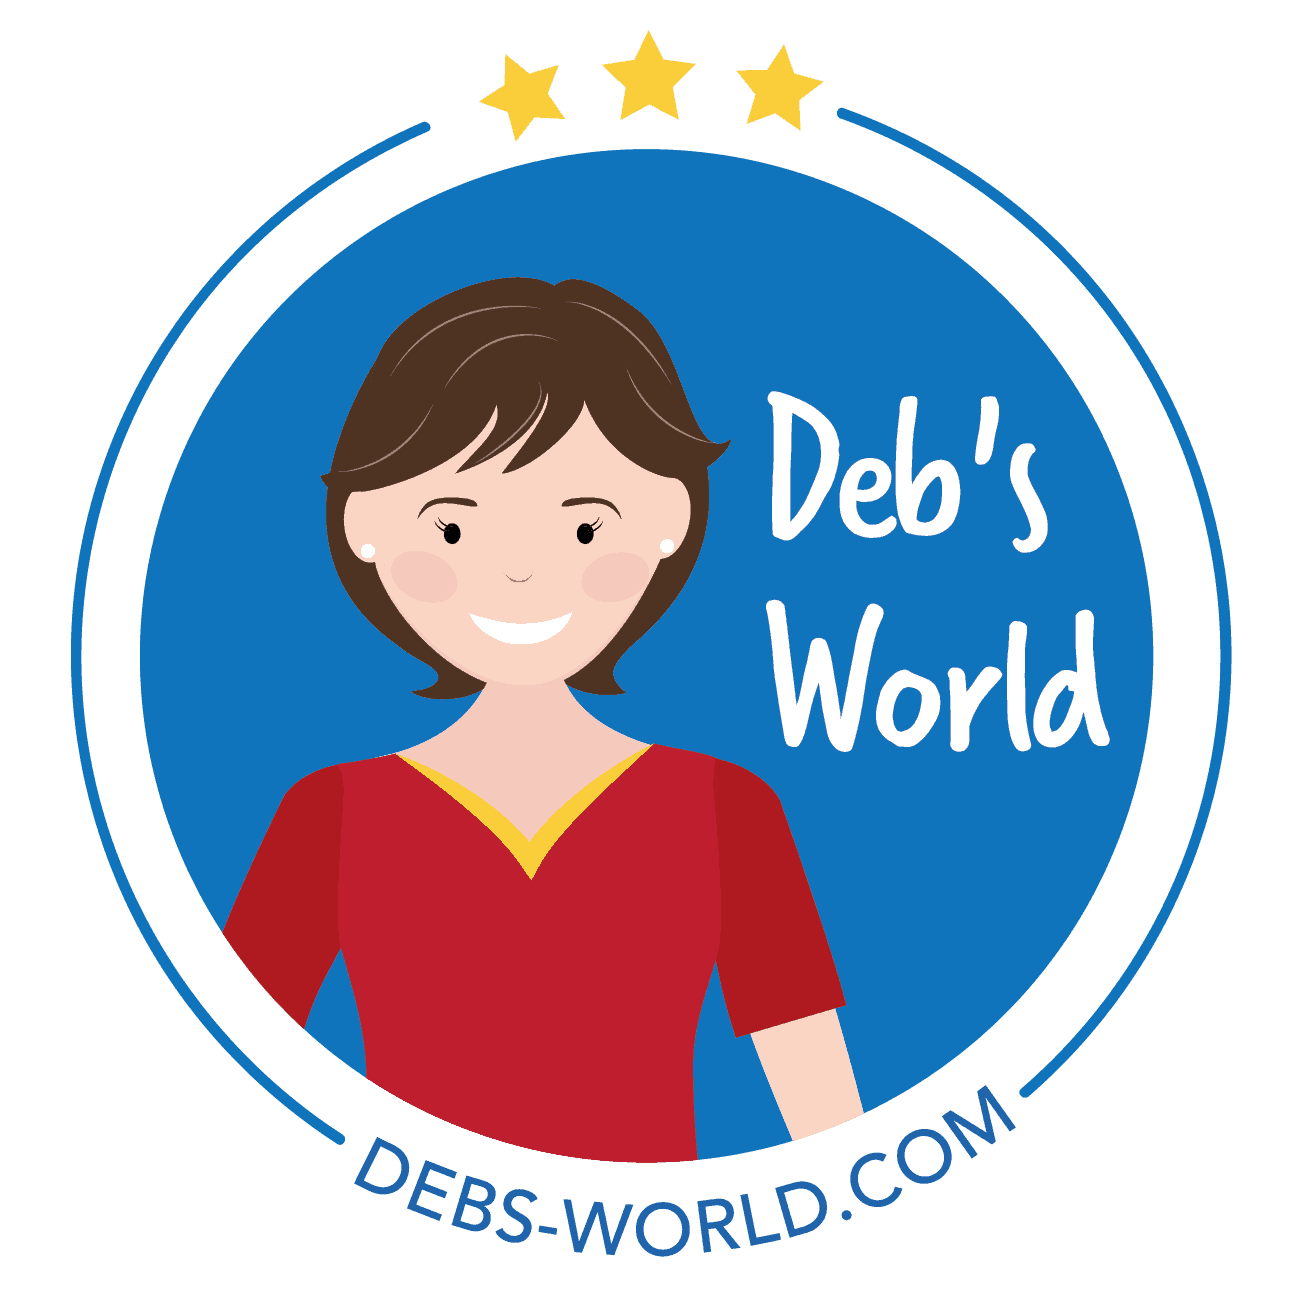 Interview with Debbie from “Deb’s World!”